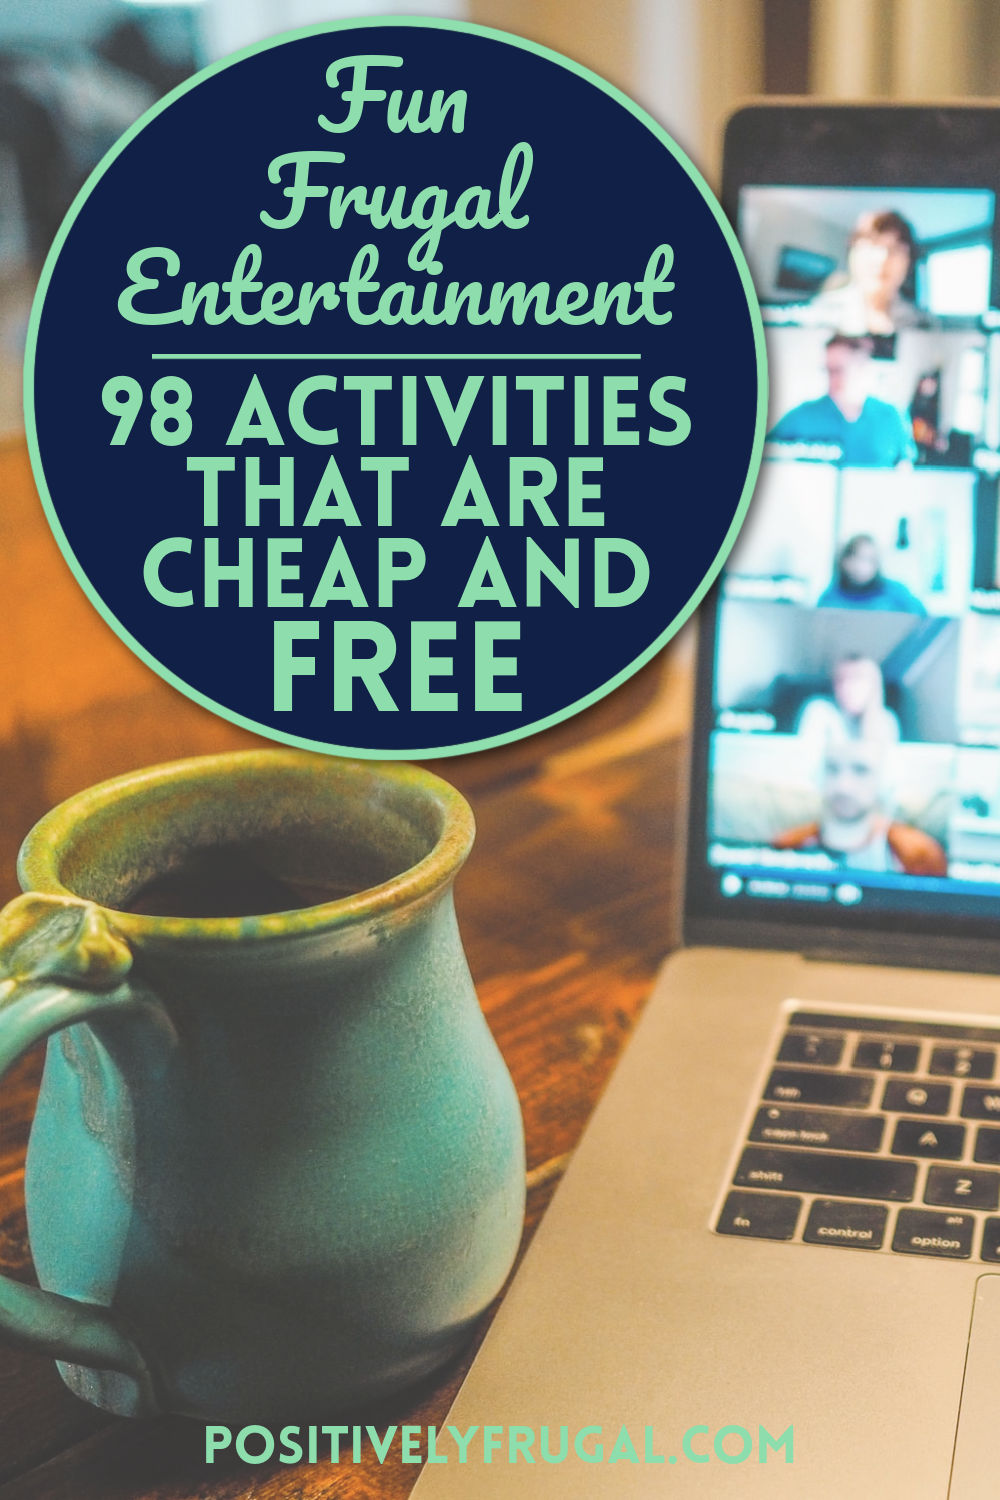 Fun Frugal Entertainment Free Activities by PositivelyFrugal.com